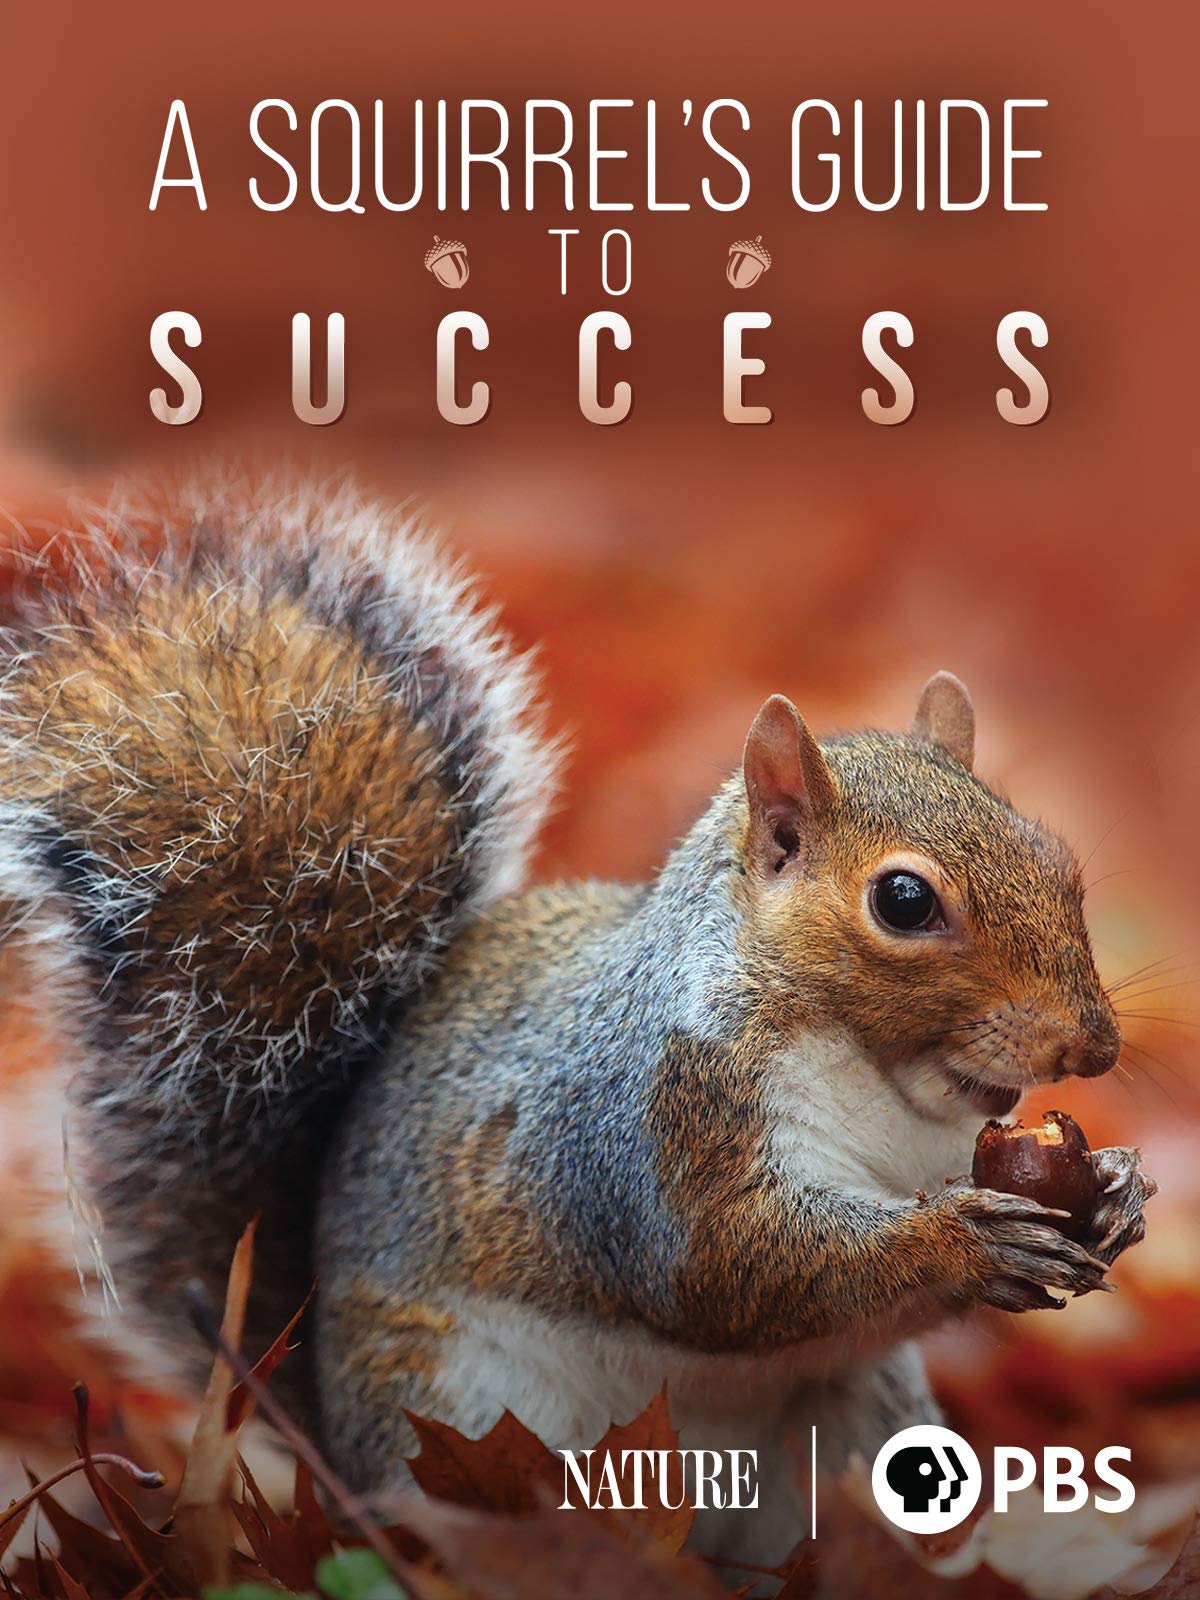 A Squirrel’s Guide to Success